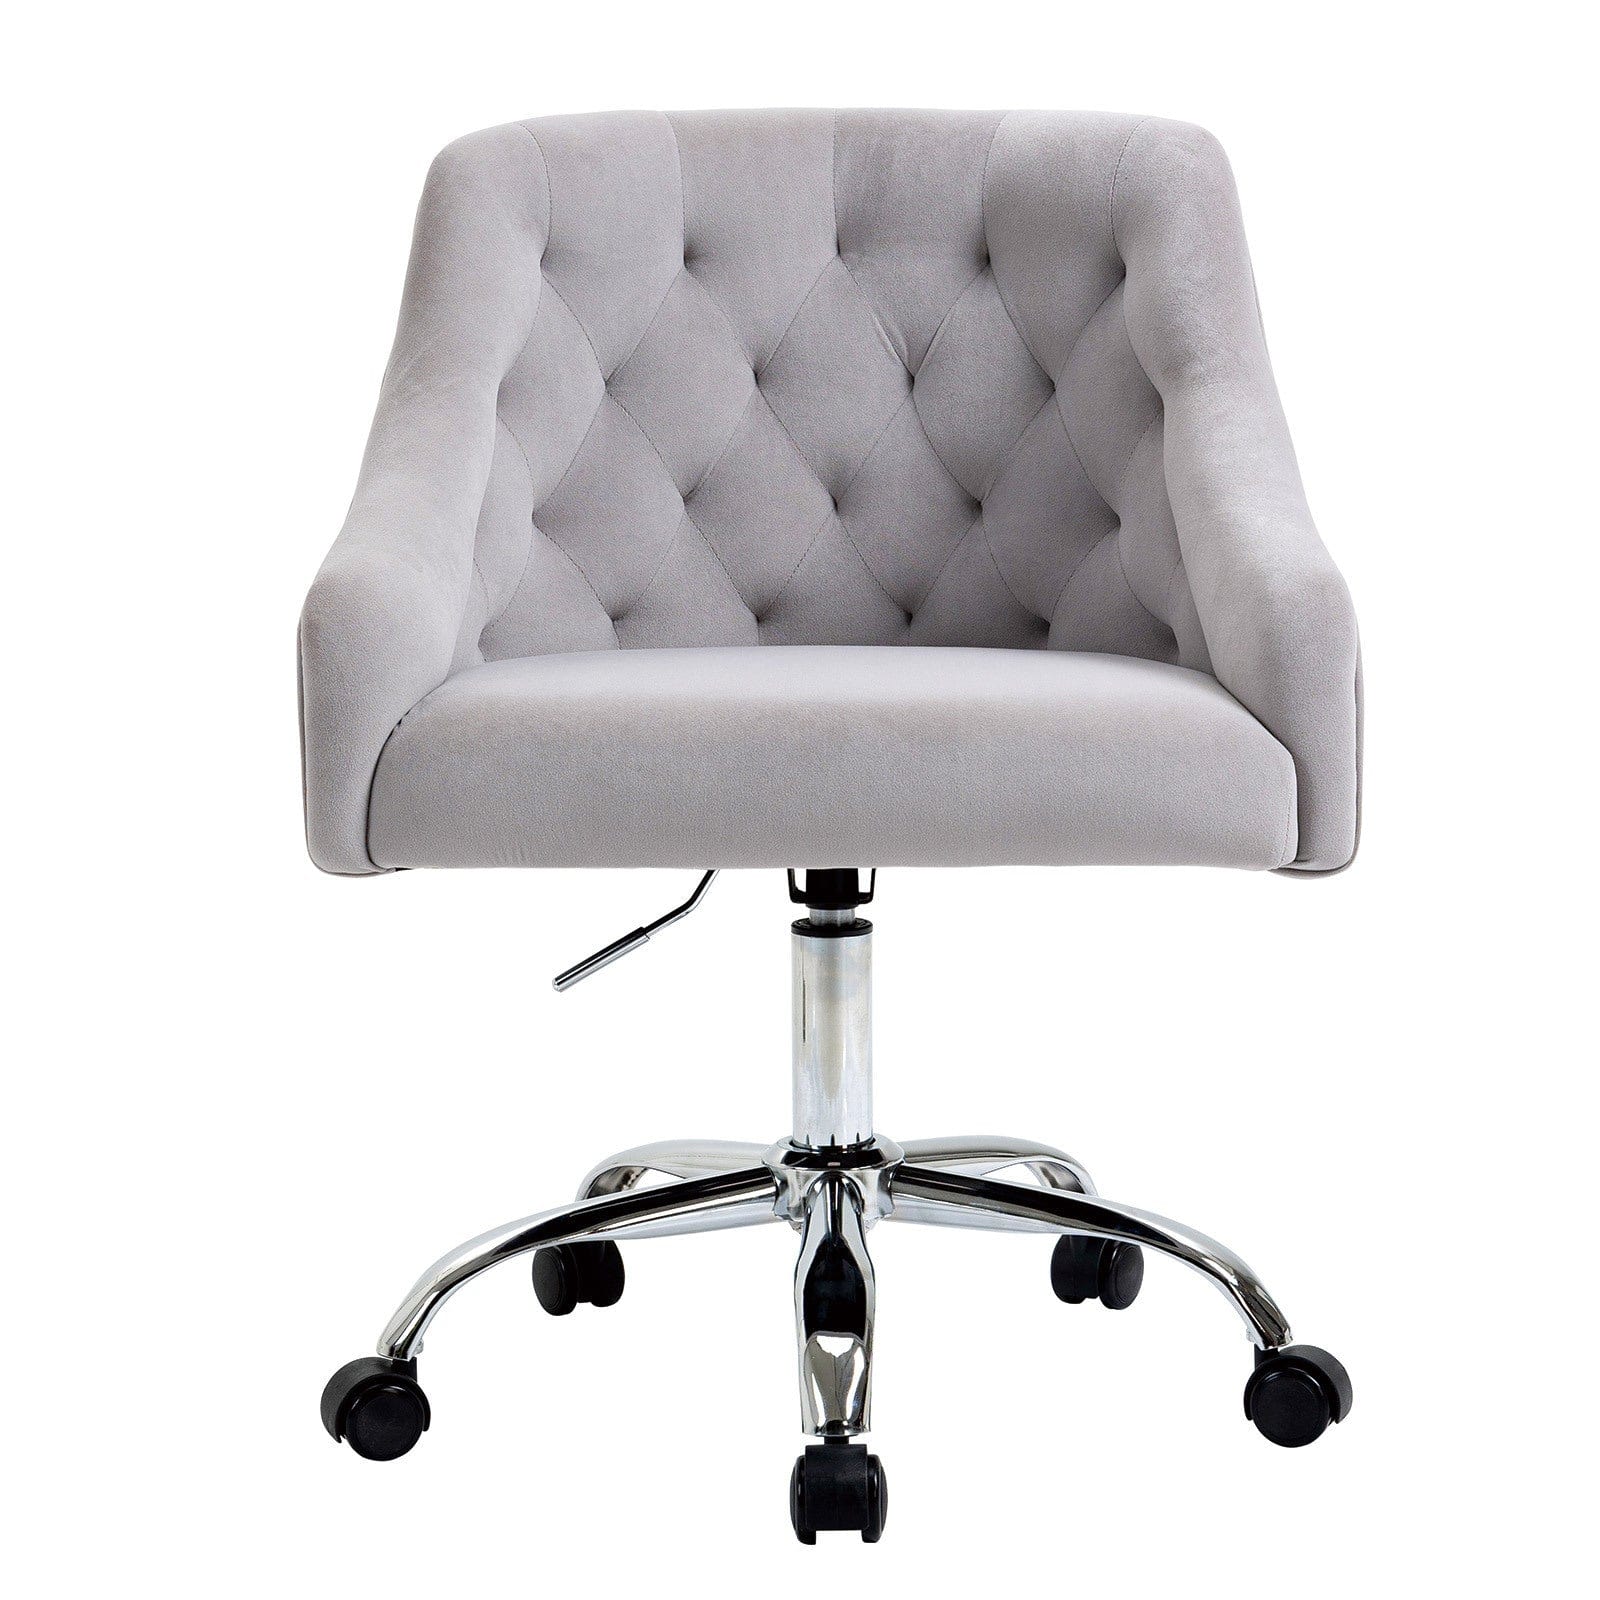 1st Choice Furniture Direct Office Chair 1st Choice Modern Velvet Office Chair with Soft Seat Cushion